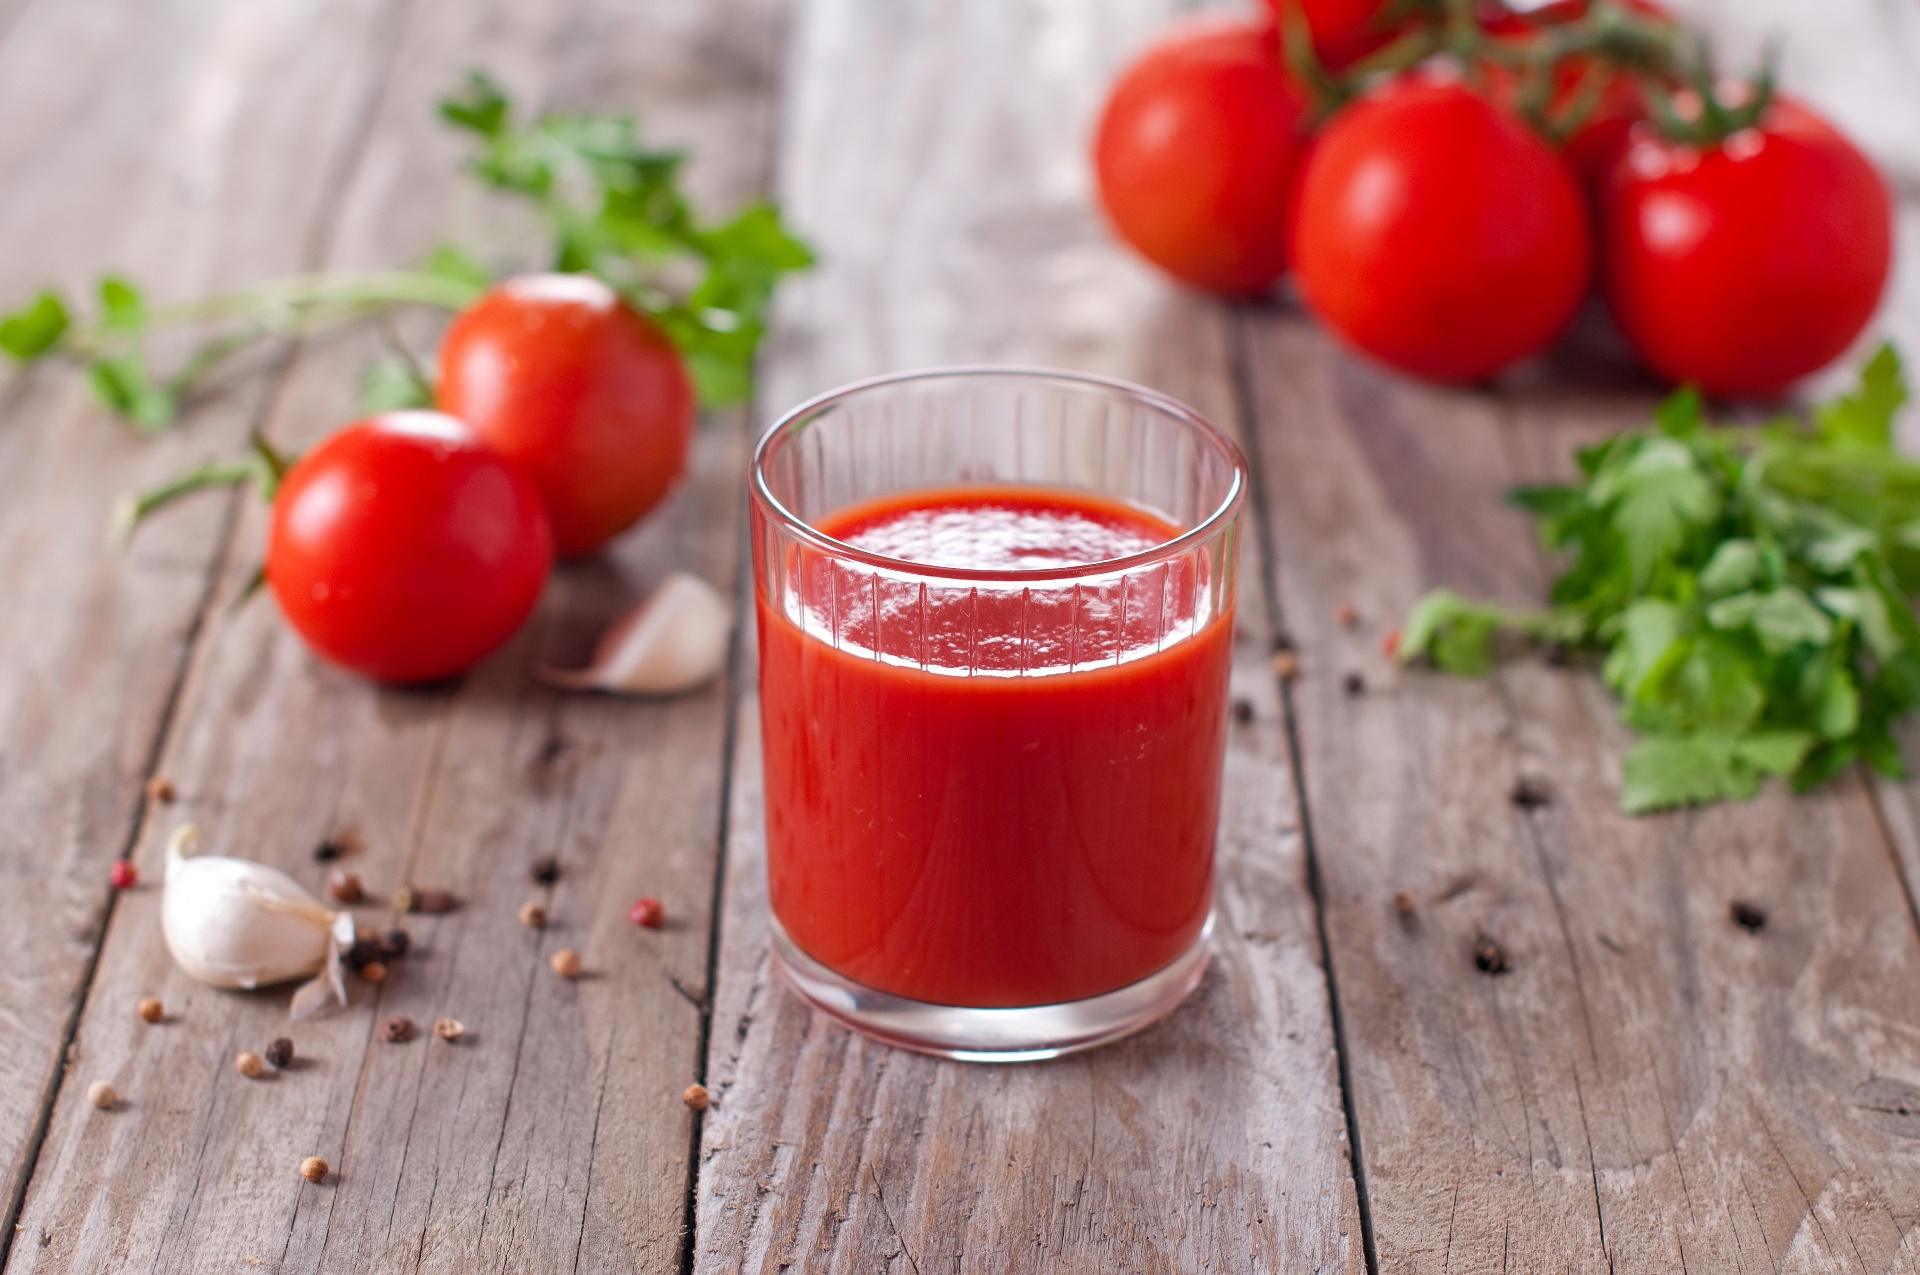 General 1920x1275 tomatoes drinking glass food juice Garlic Black pepper (Spice) wooden surface leaves